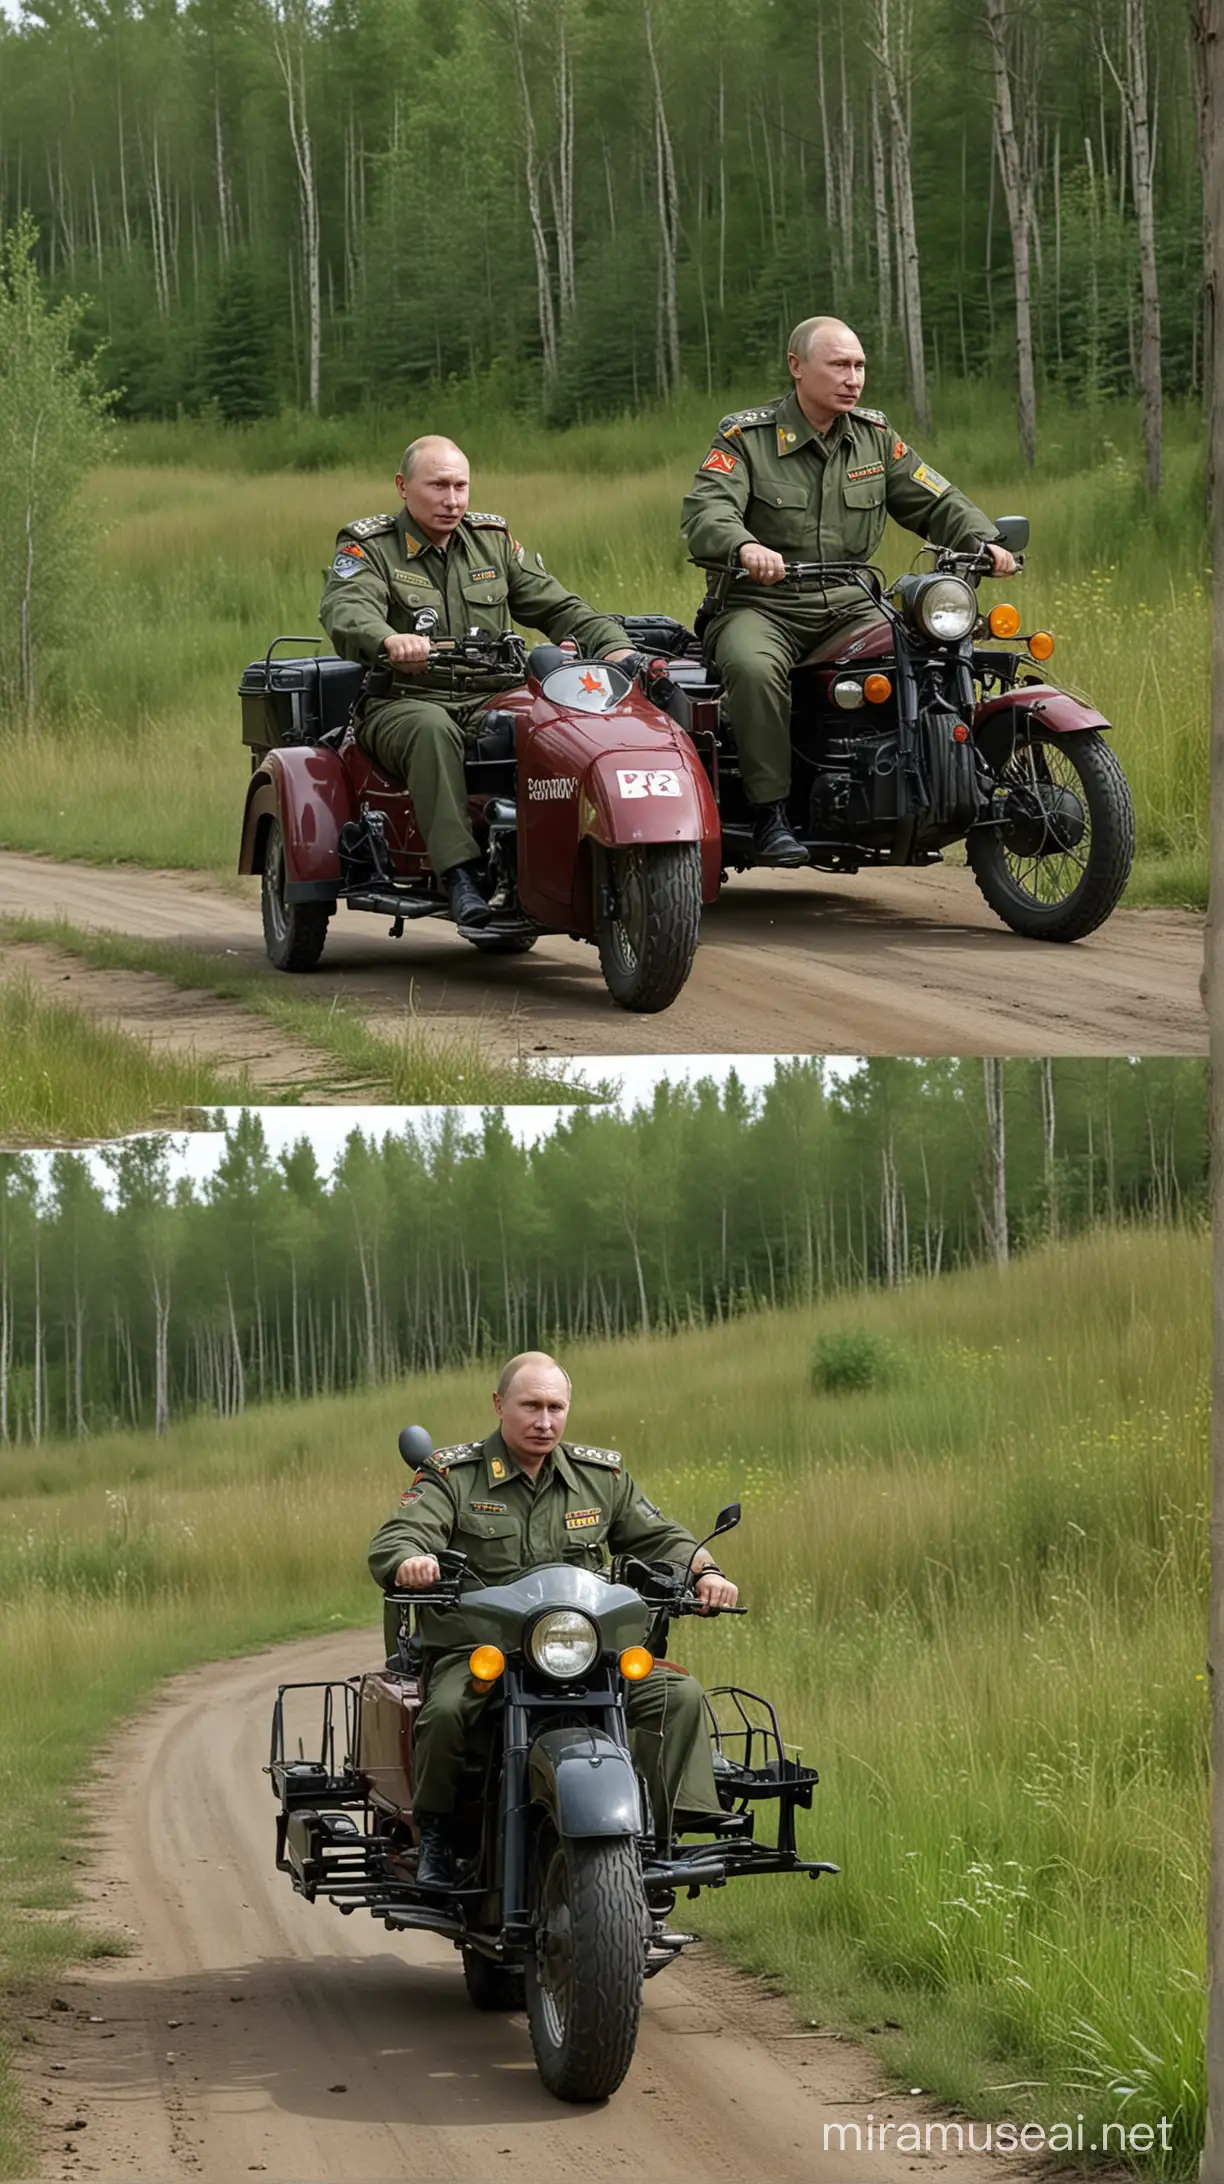 62 years old real face putin , soviet militarypolice  uniform driving low Sidecar three wheeled motorcycle ,his hands farway from motorcycle handler,hands in air to shaking ,8k,in forest aroud super higher grass, left 2 wheels on ground 75 degree angles, right wheel hang on air, 